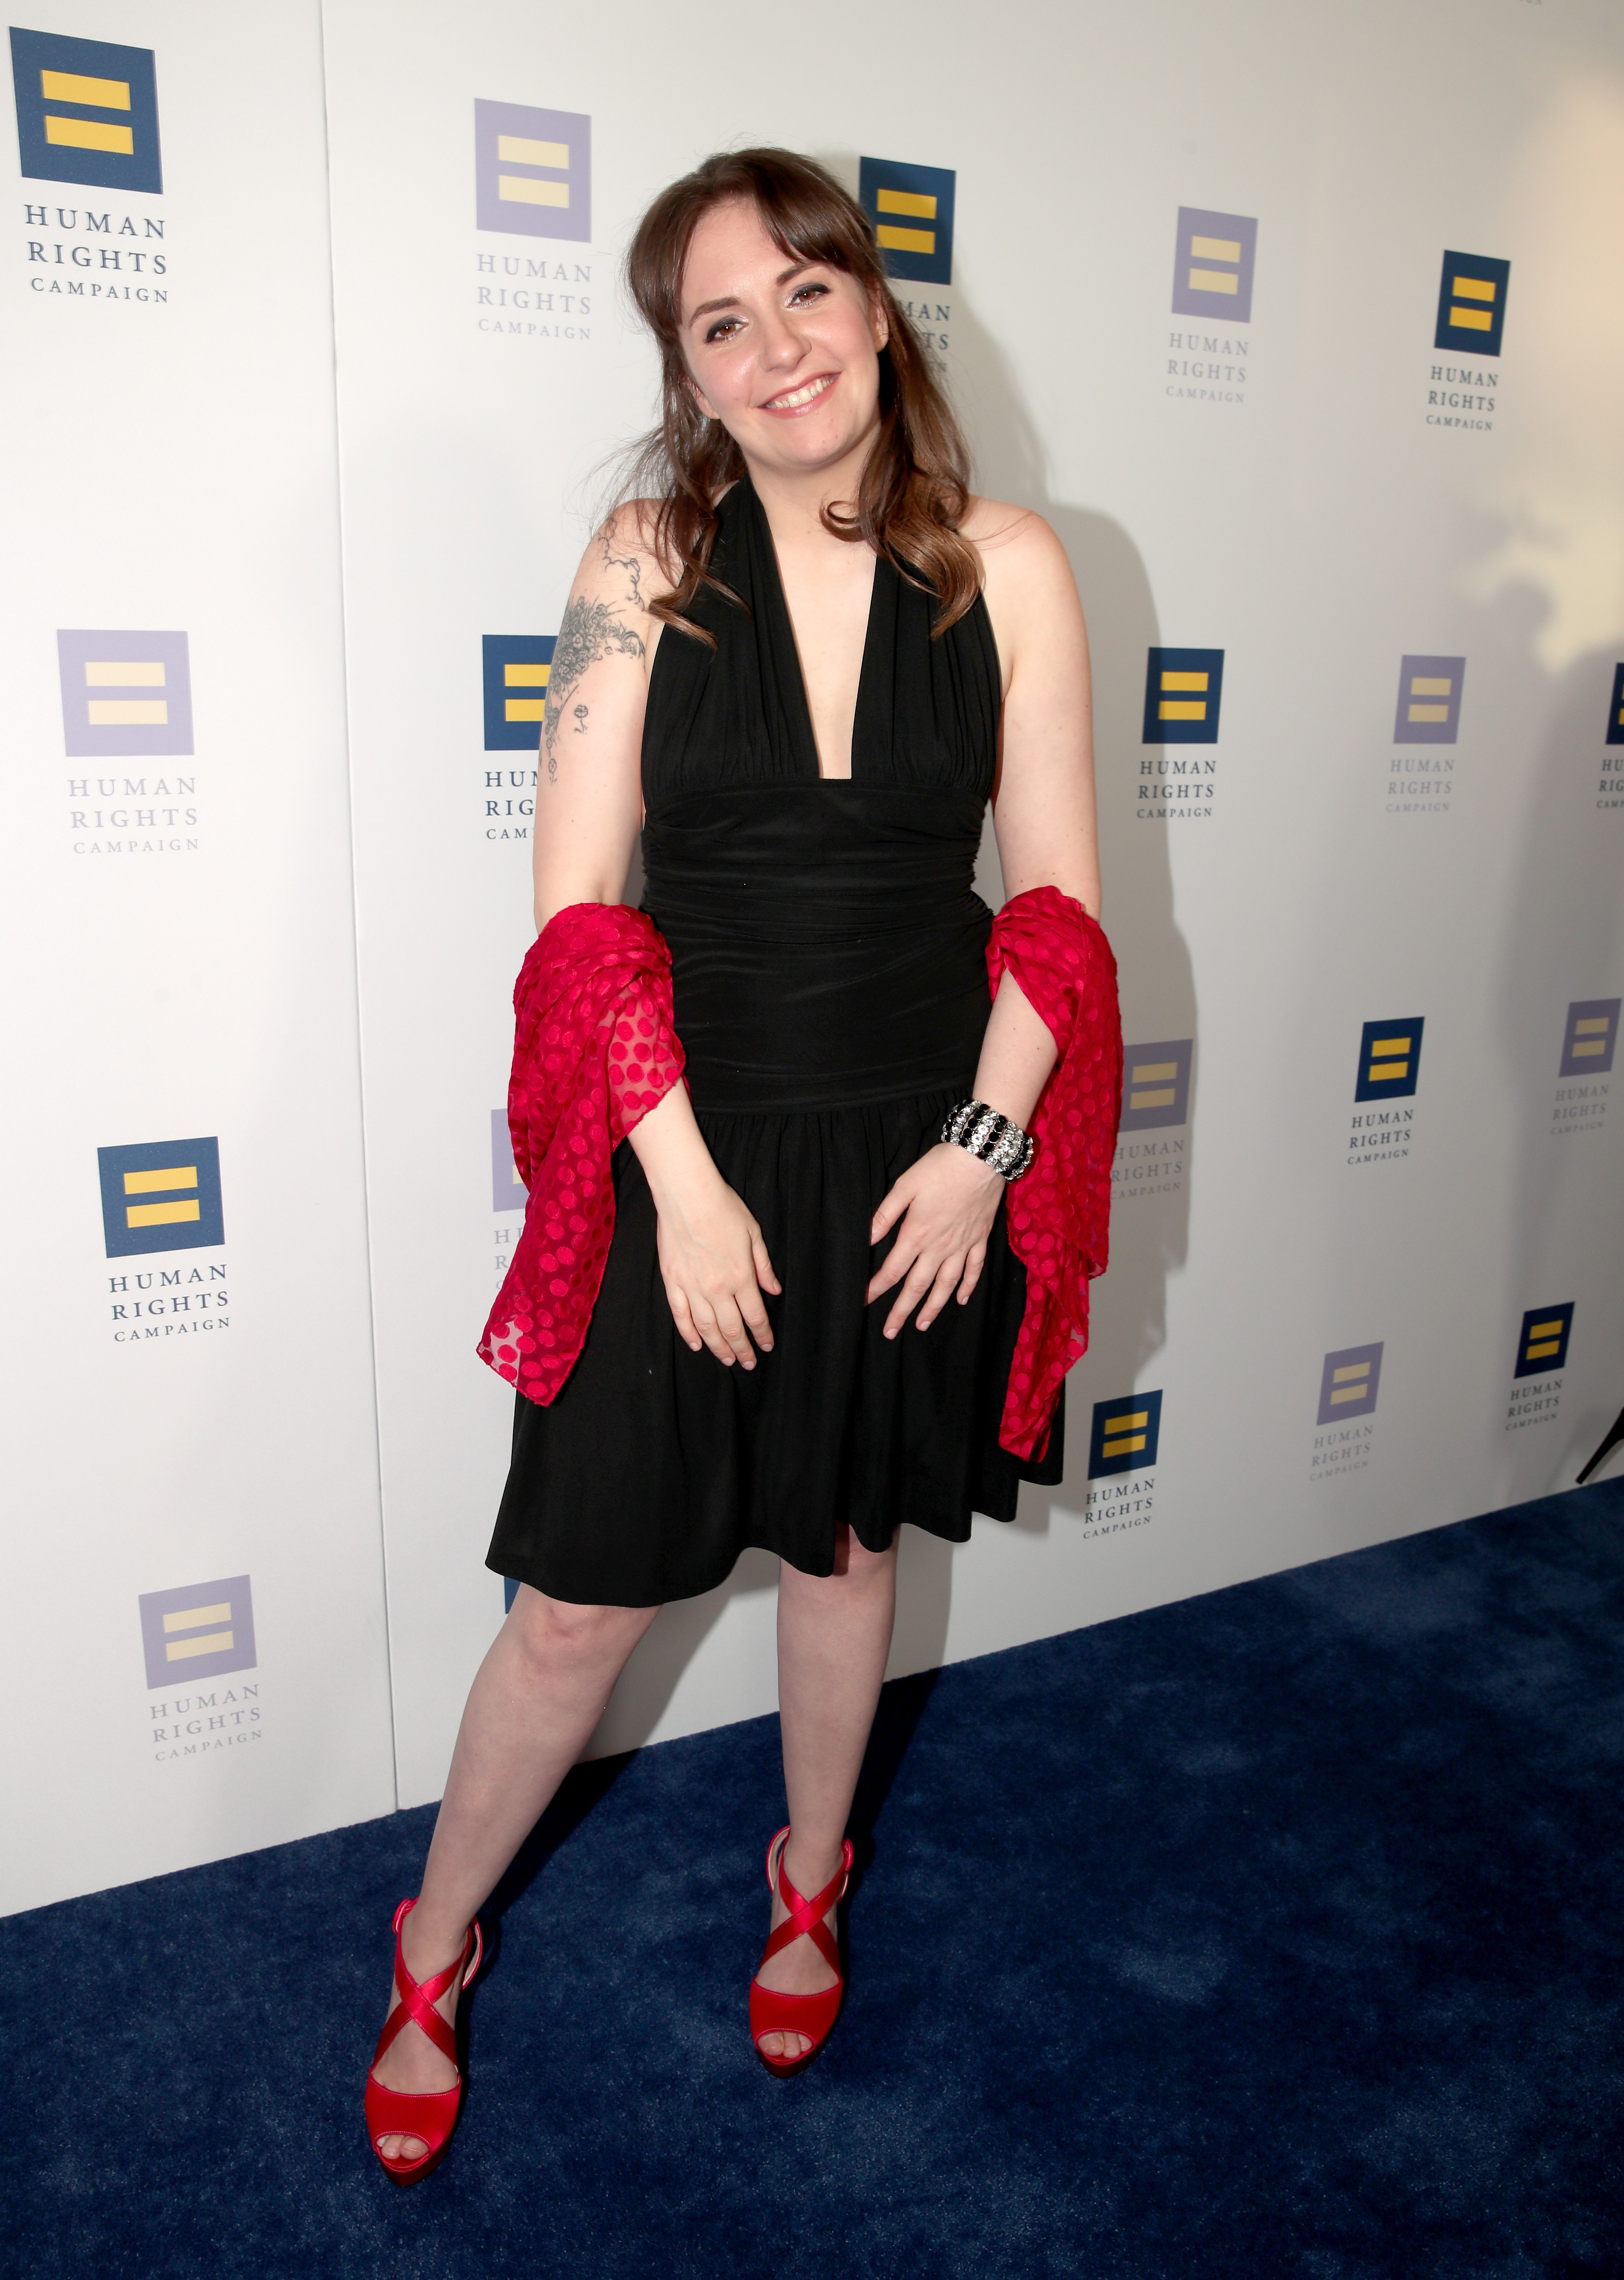 LOS ANGELES, CA - MARCH 18: Actor Lena Dunham at The Human Rights Campaign 2017 Los Angeles Gala Dinner at JW Marriott Los Angeles at L.A. LIVE on March 18, 2017 in Los Angeles, California. (Photo by Christopher Polk/Getty Images )